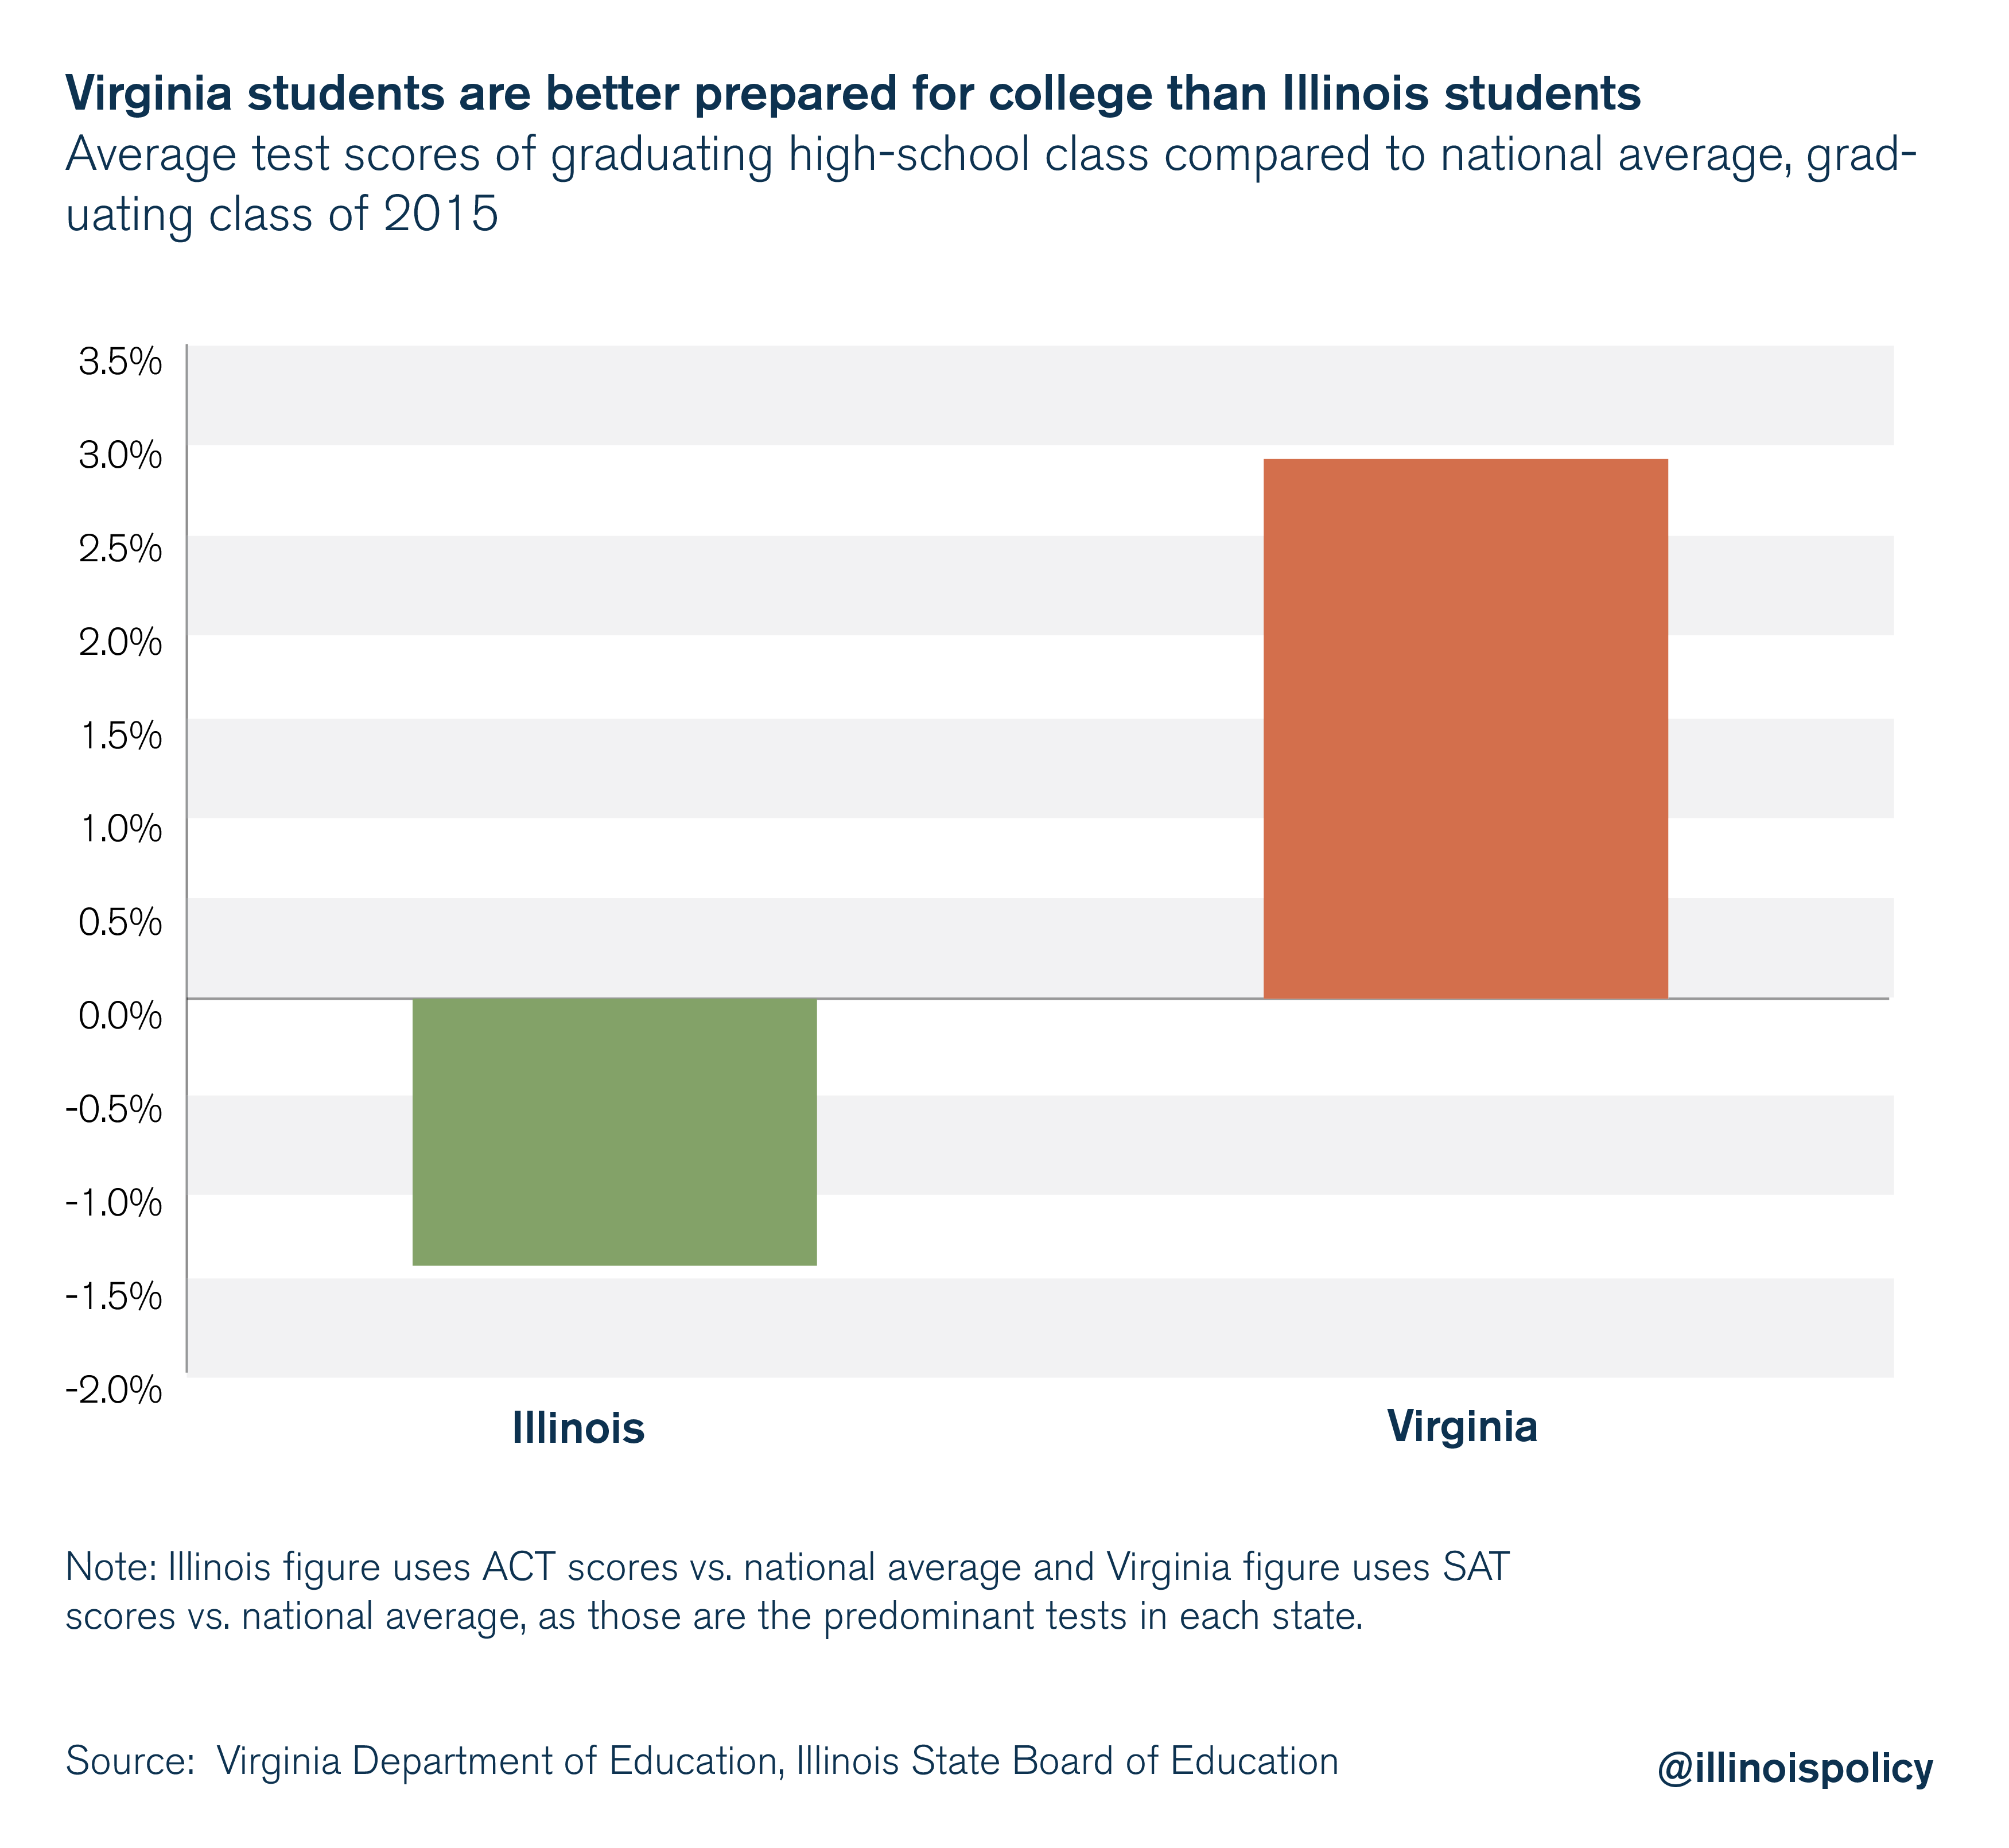 Virginia students are better prepared for college than Illinois students